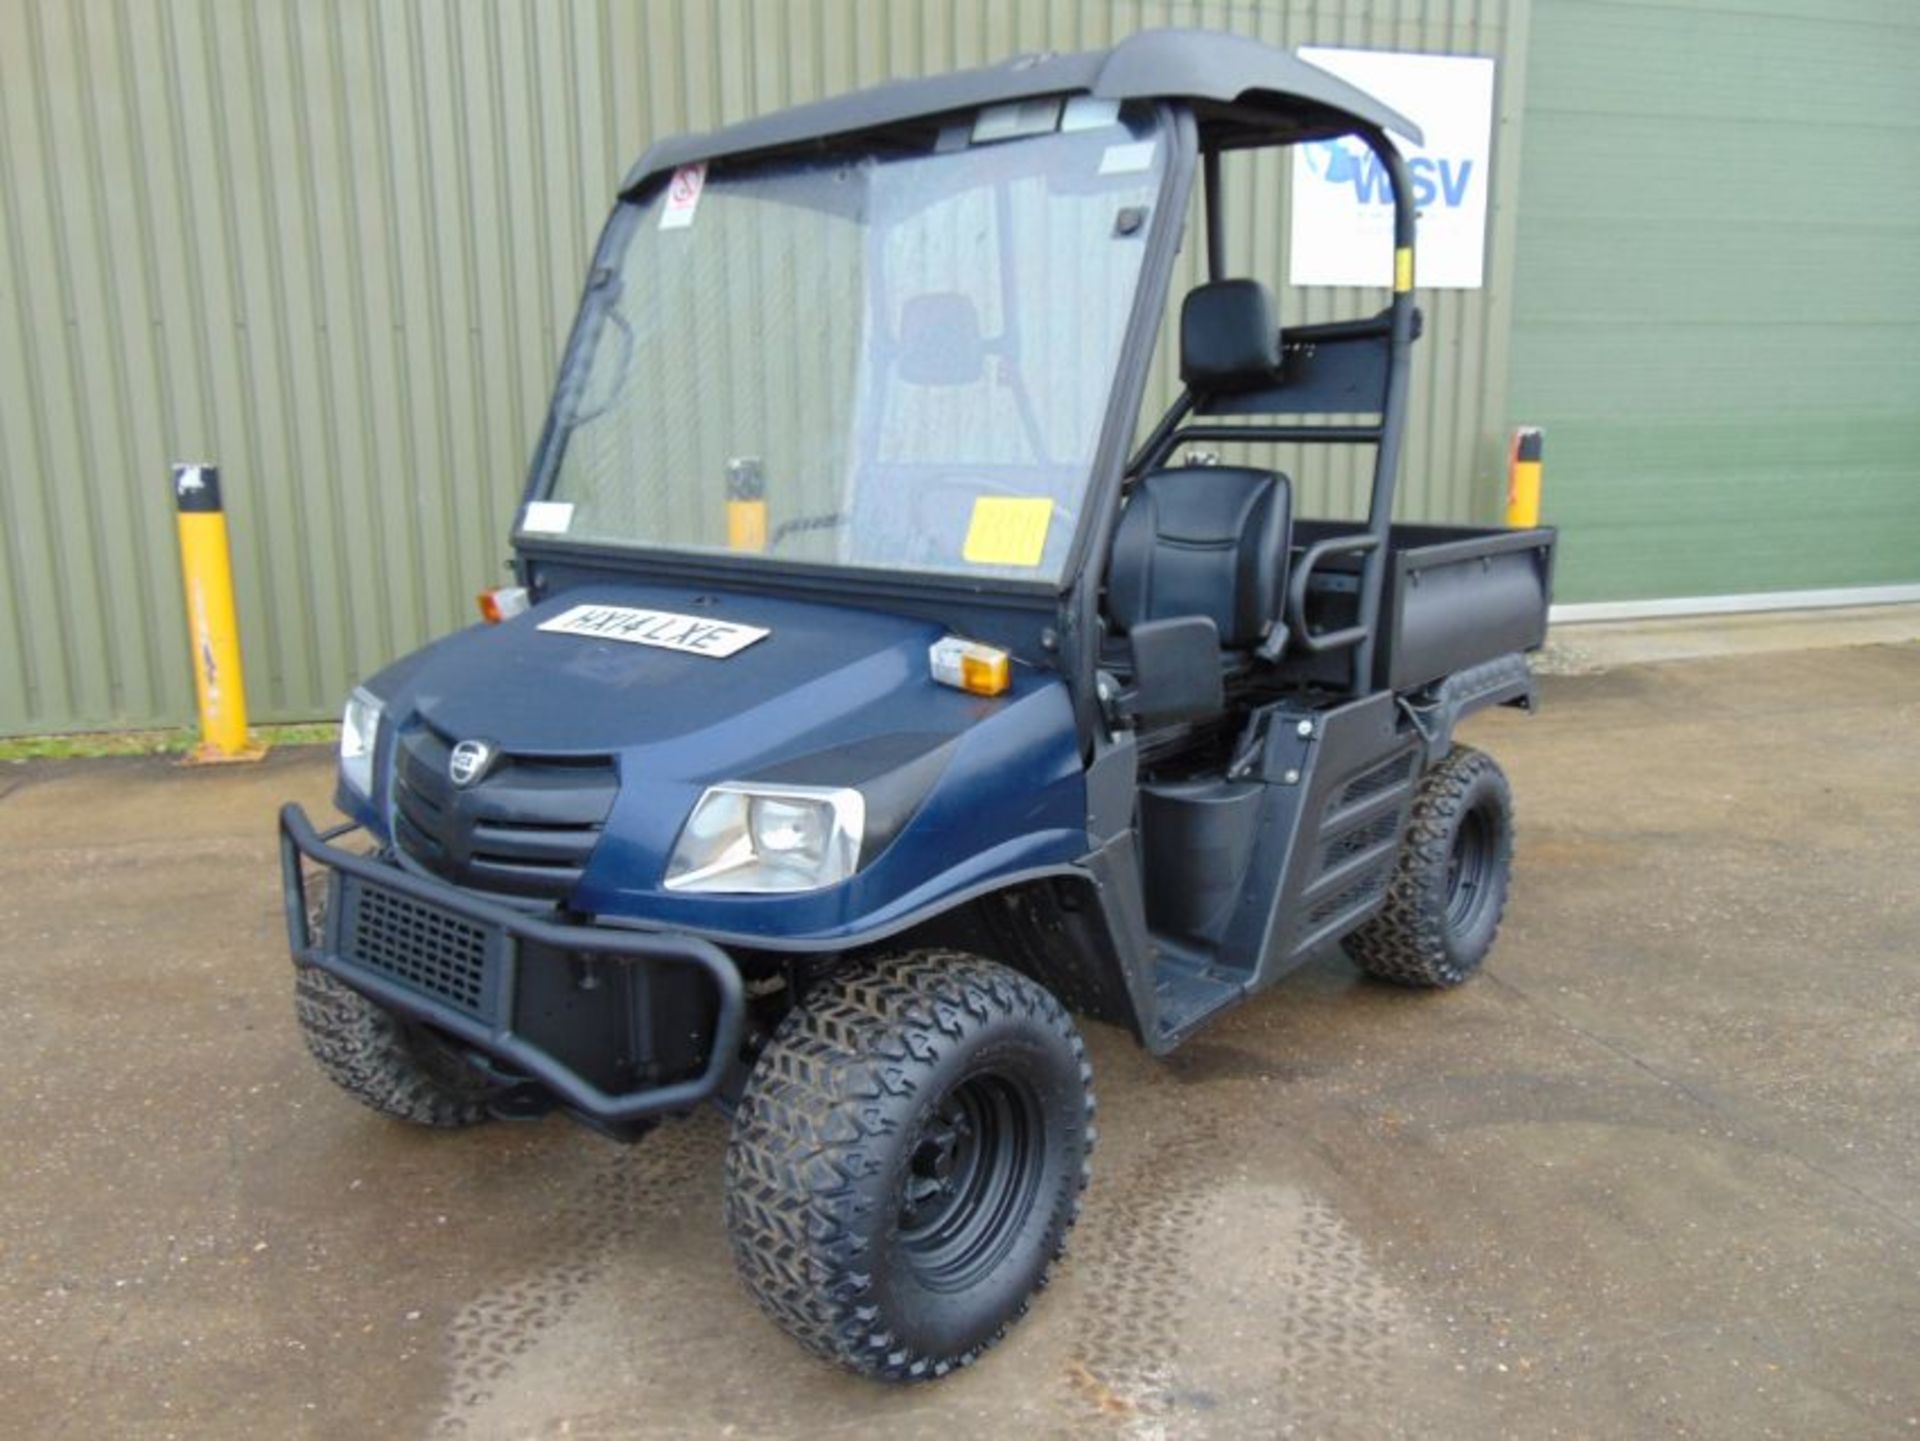 2014 Cushman XD1600 4x4 Diesel Utility Vehicle Showing 1104 hrs - Image 2 of 25